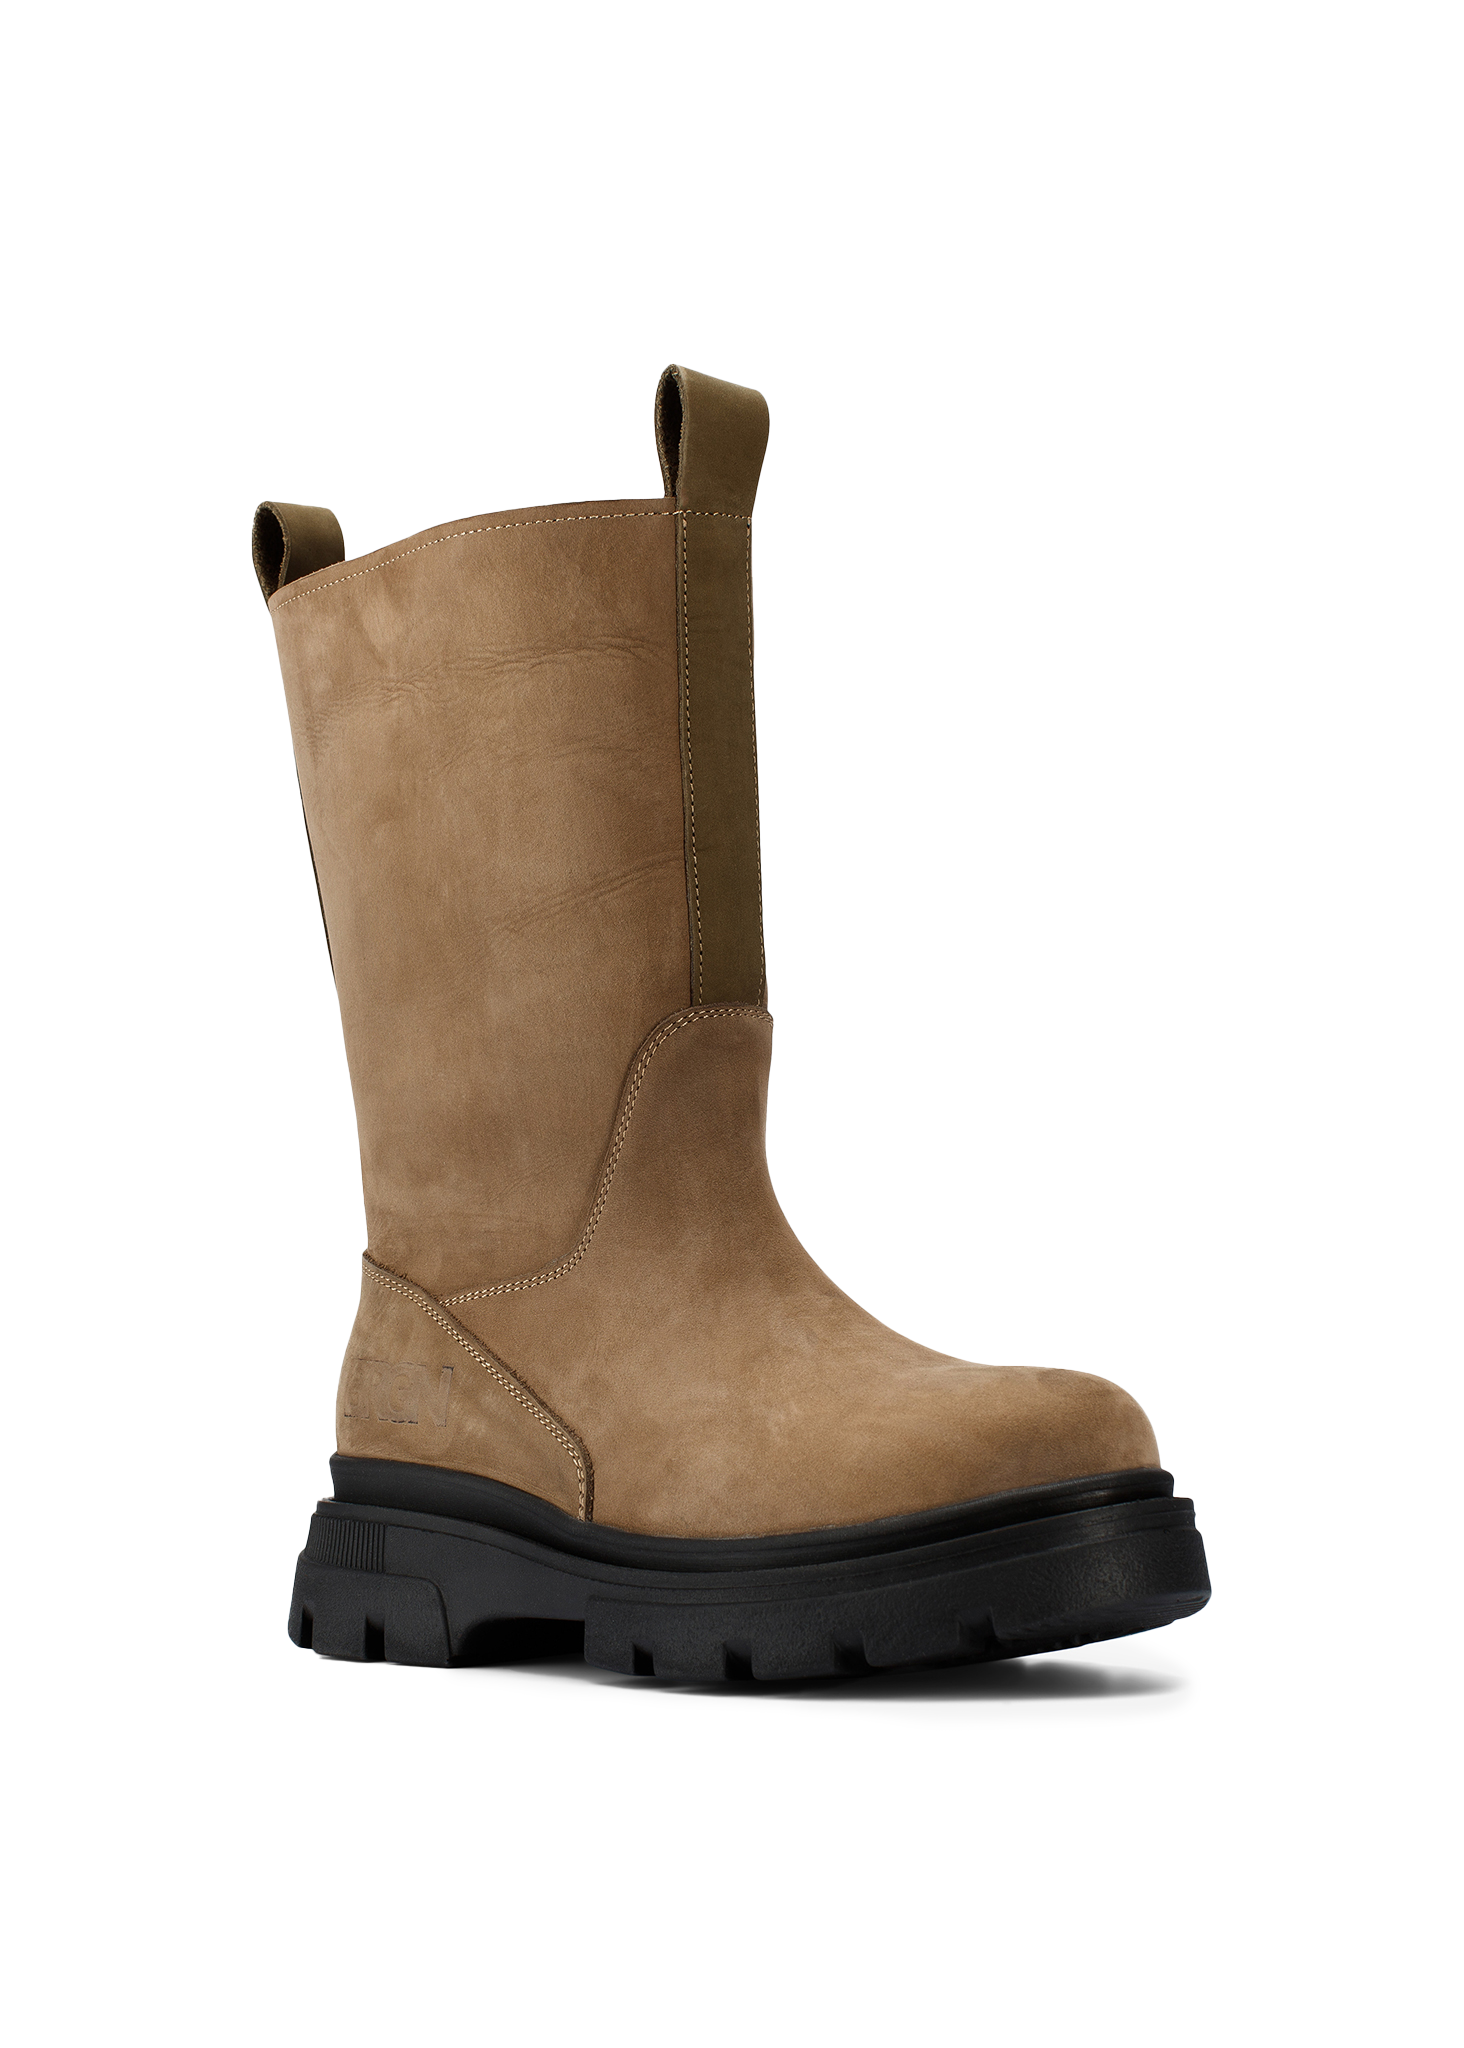 BRGN by Lunde & Gaundal Biker Boots Shoes 145 Camel